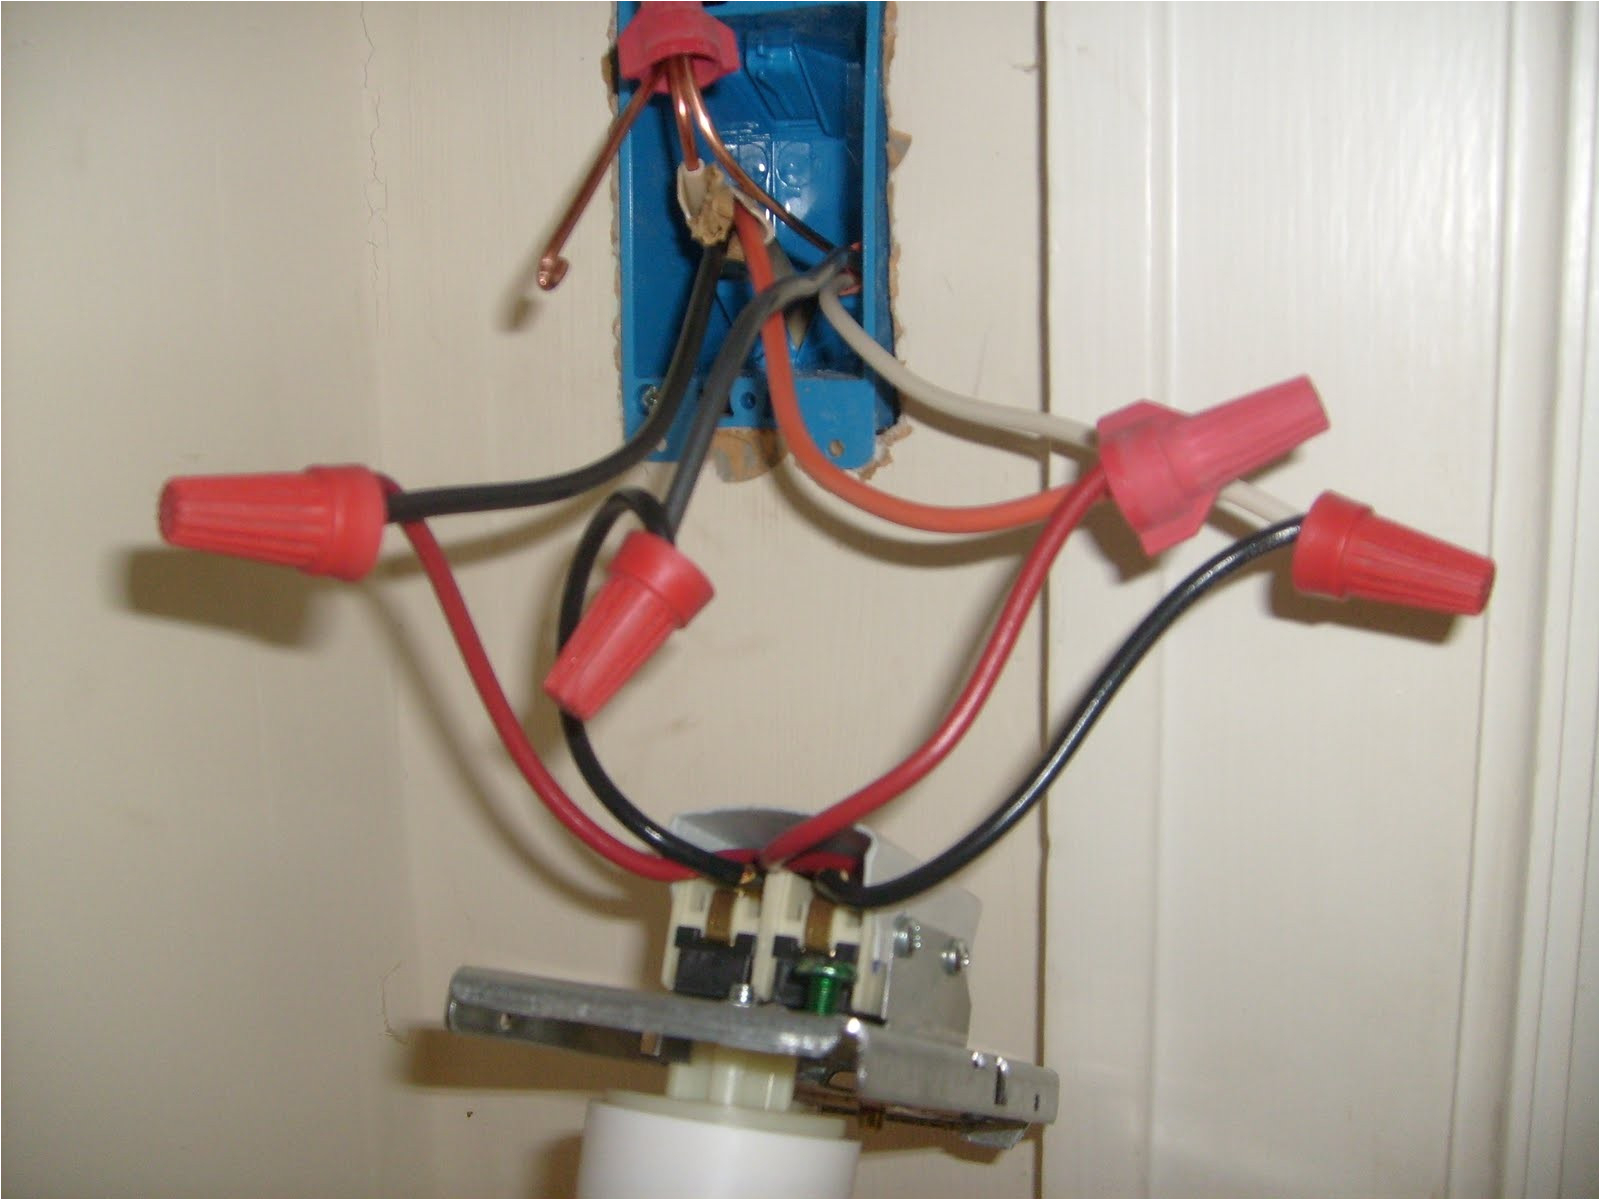 baseboard heater thermostat wiring diagram